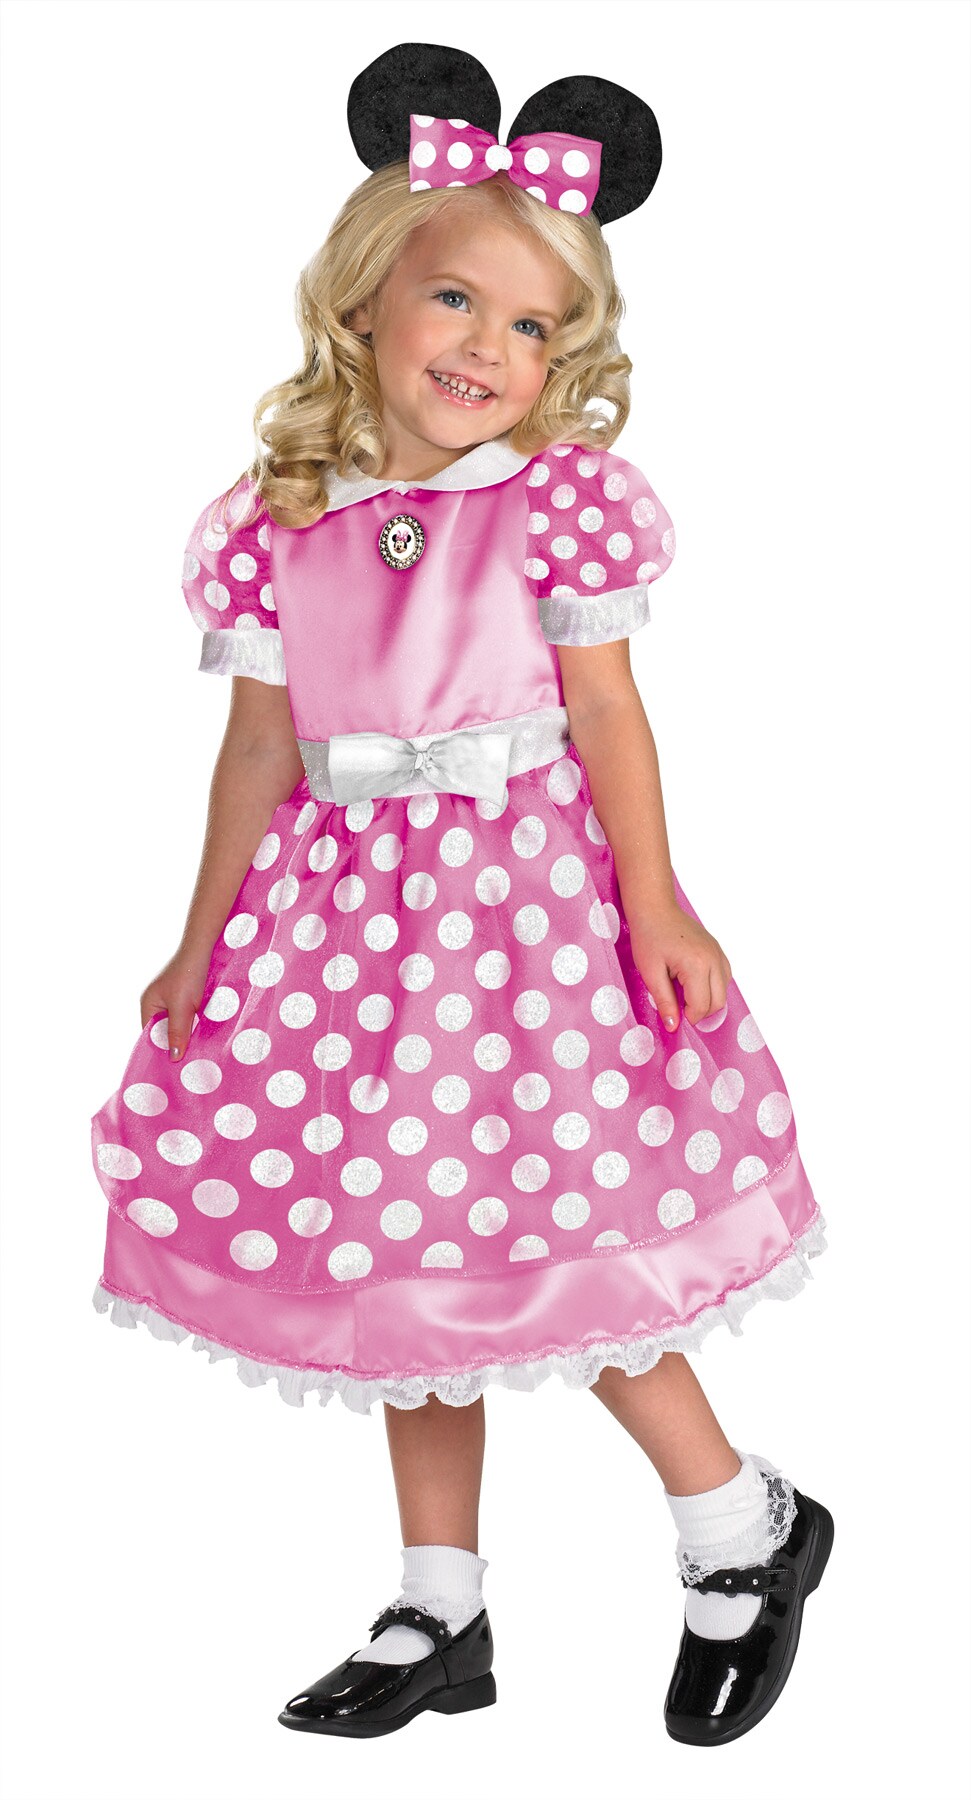 The Costume Center Pink and White Clubhouse Minne Mouse Polka Dotted Girls Toddler Costume - Small Size